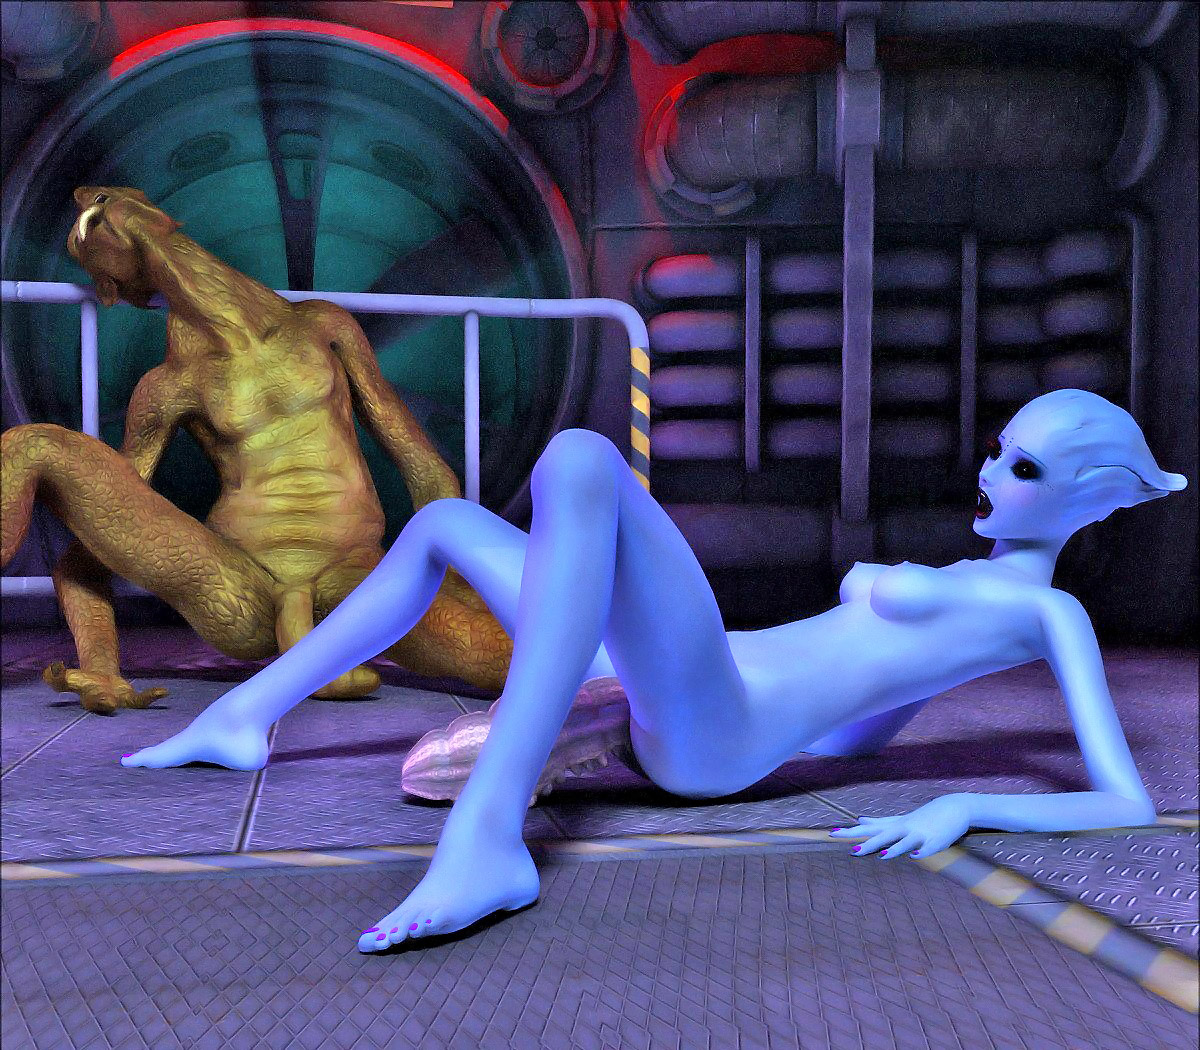 Alien Impregnation Toons - Wonderful blue 3D aliens getting impregnated and giving birth - alien  gallery at 3dEvilMonsters